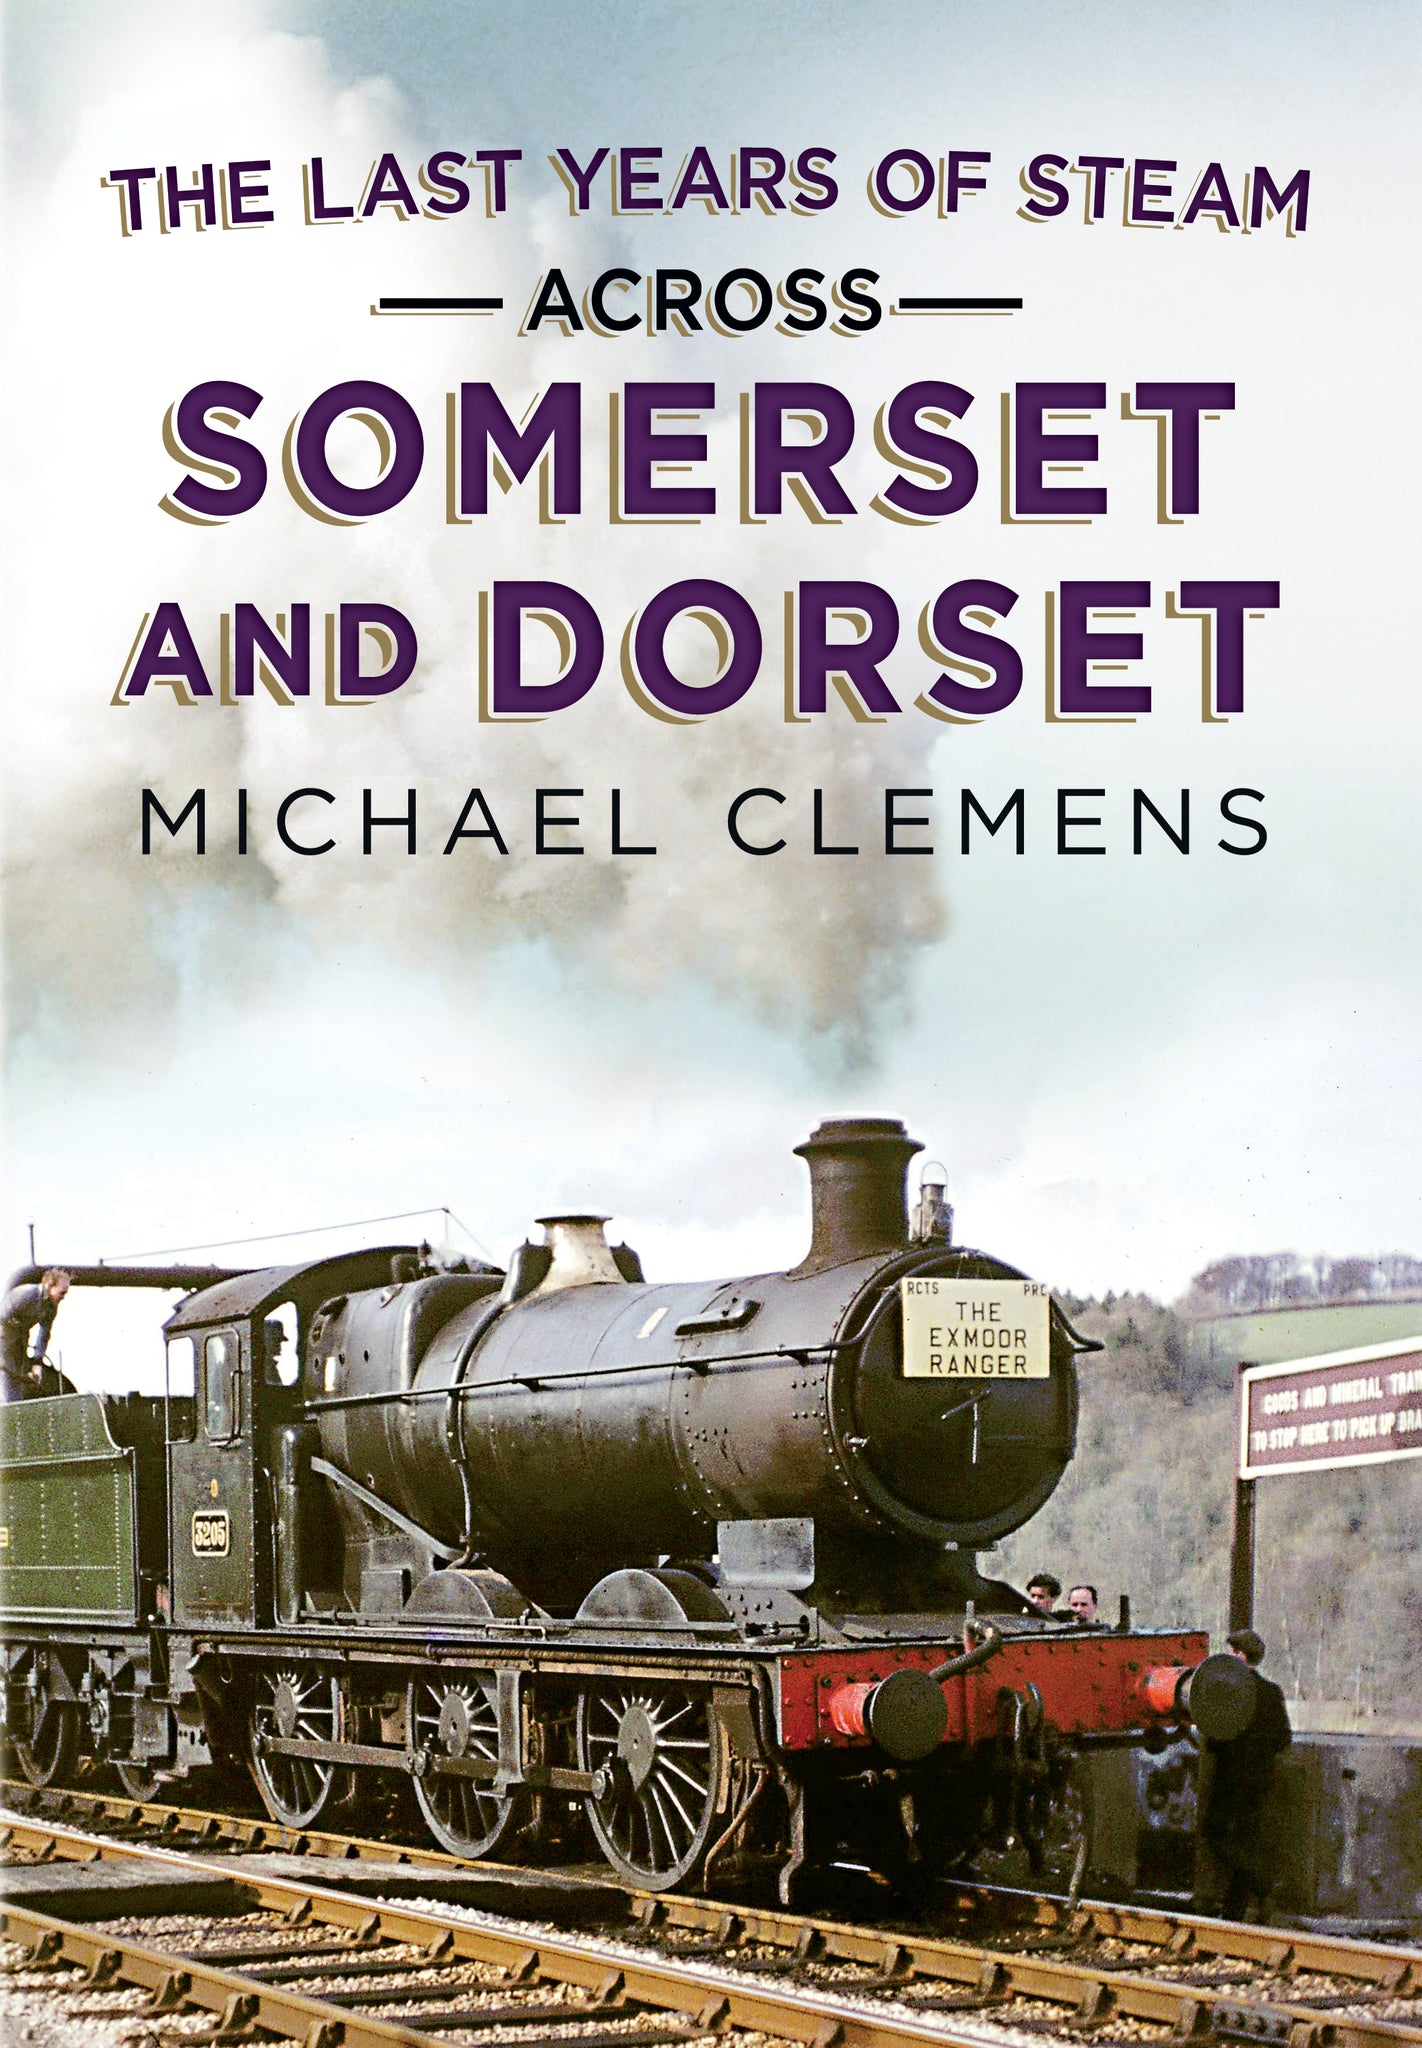 The Last Years of Steam Across Somerset and Dorset